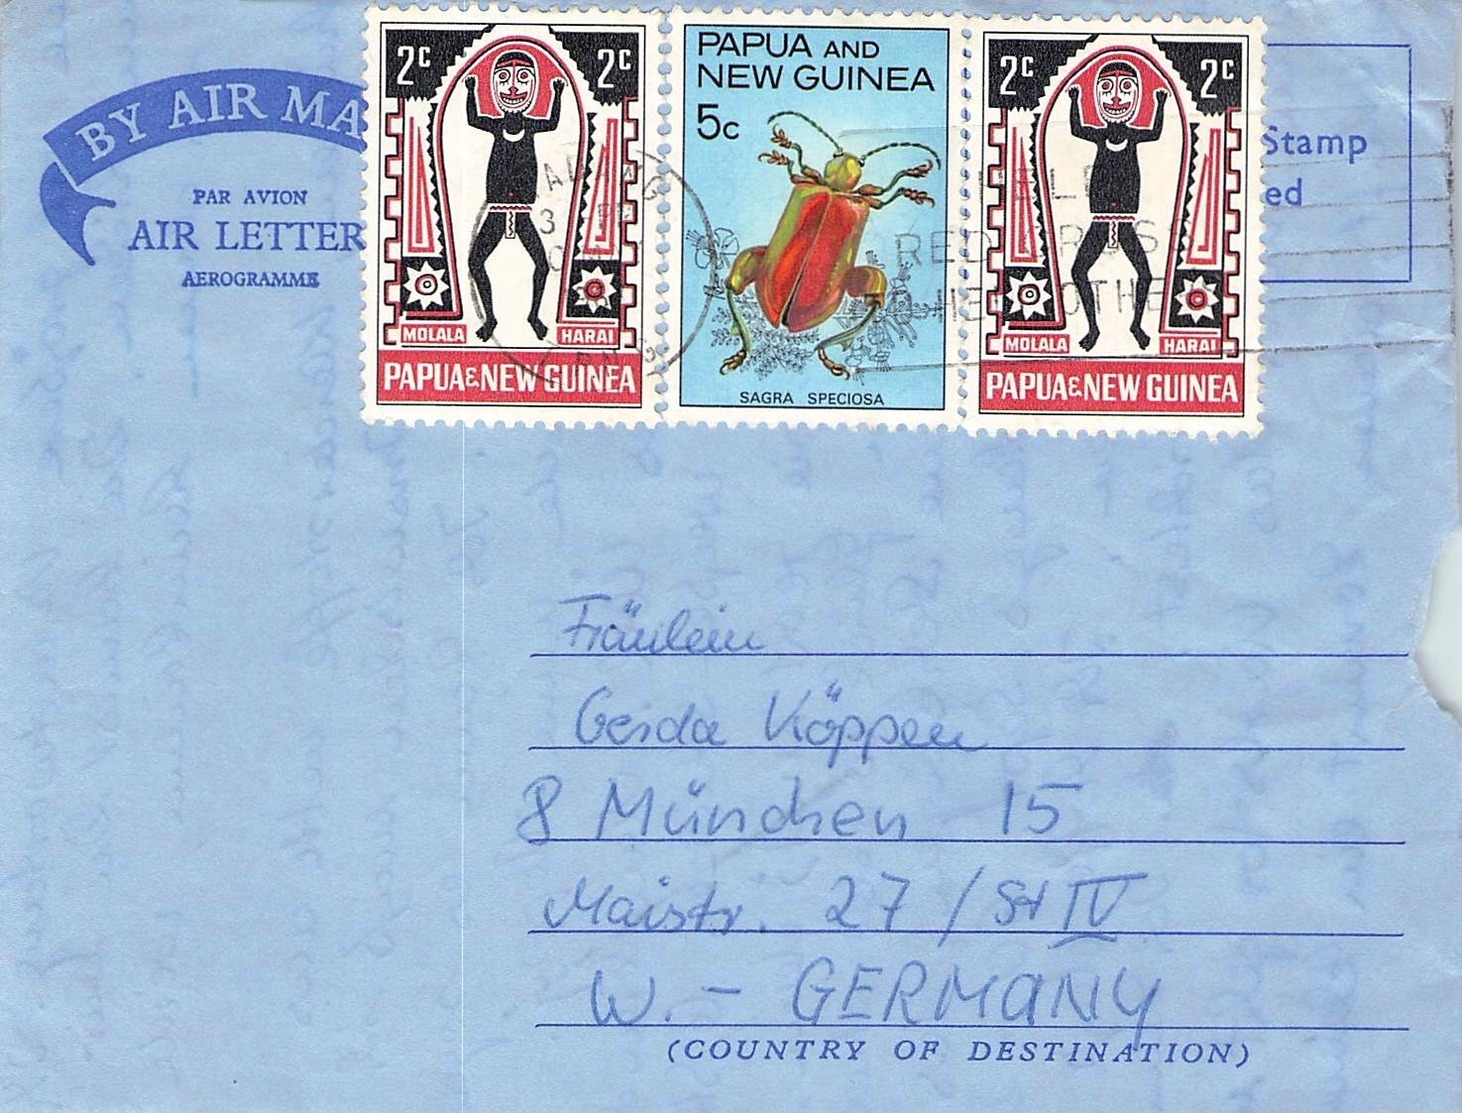 PAPUA NEW GUINEA - AIR MAIL LETTER Ca 1974 -> GERMANY  -FRAGMENT- - Papua New Guinea